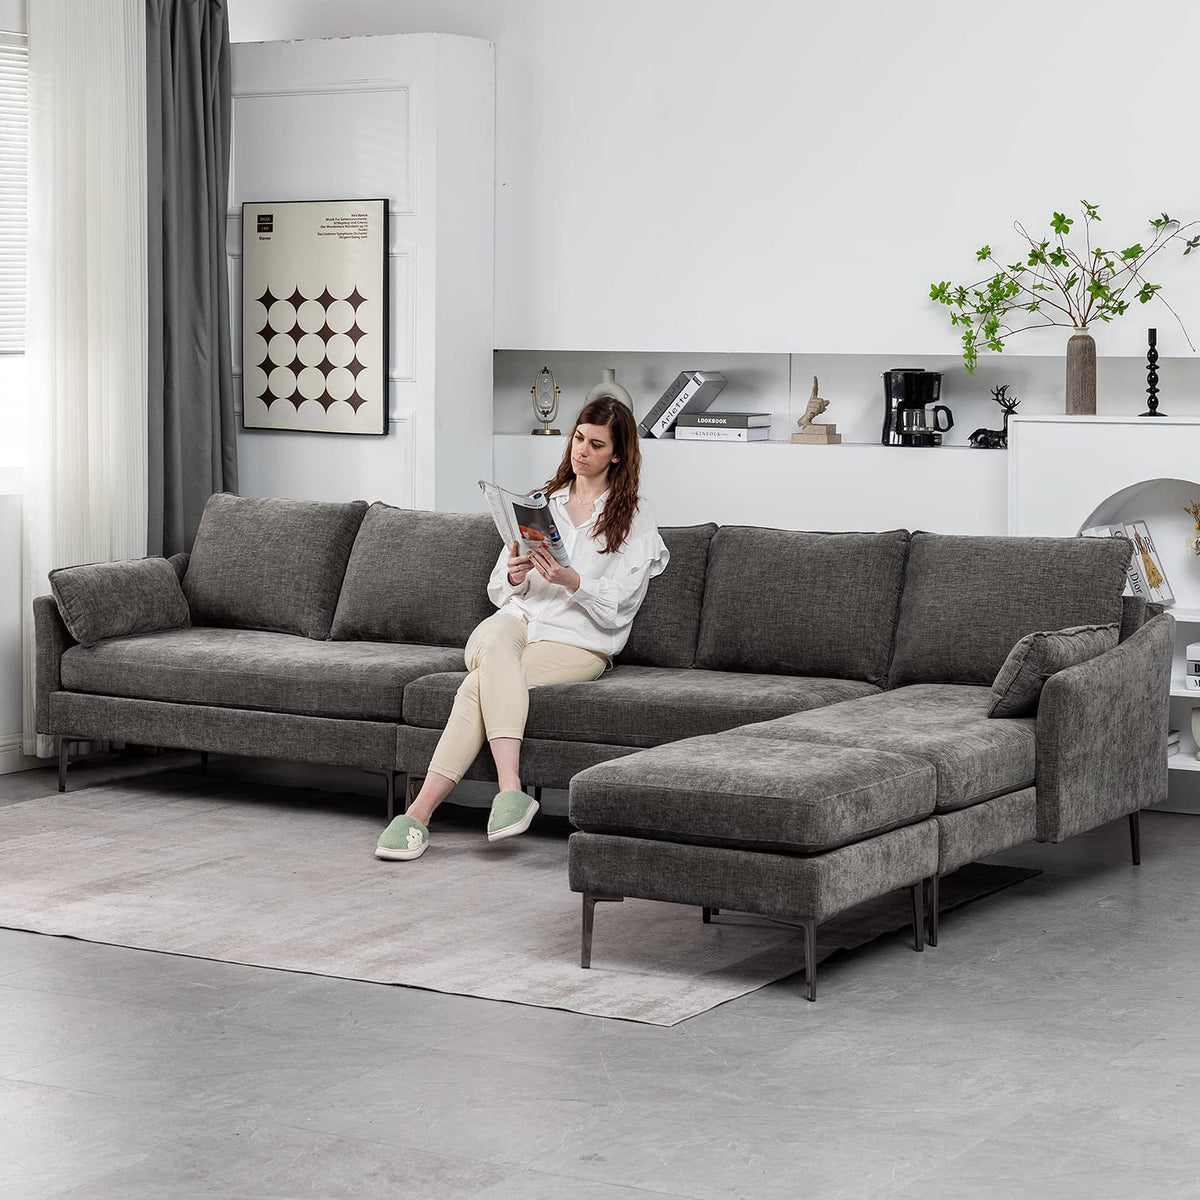 Modular Chenille Sectional Sofa With